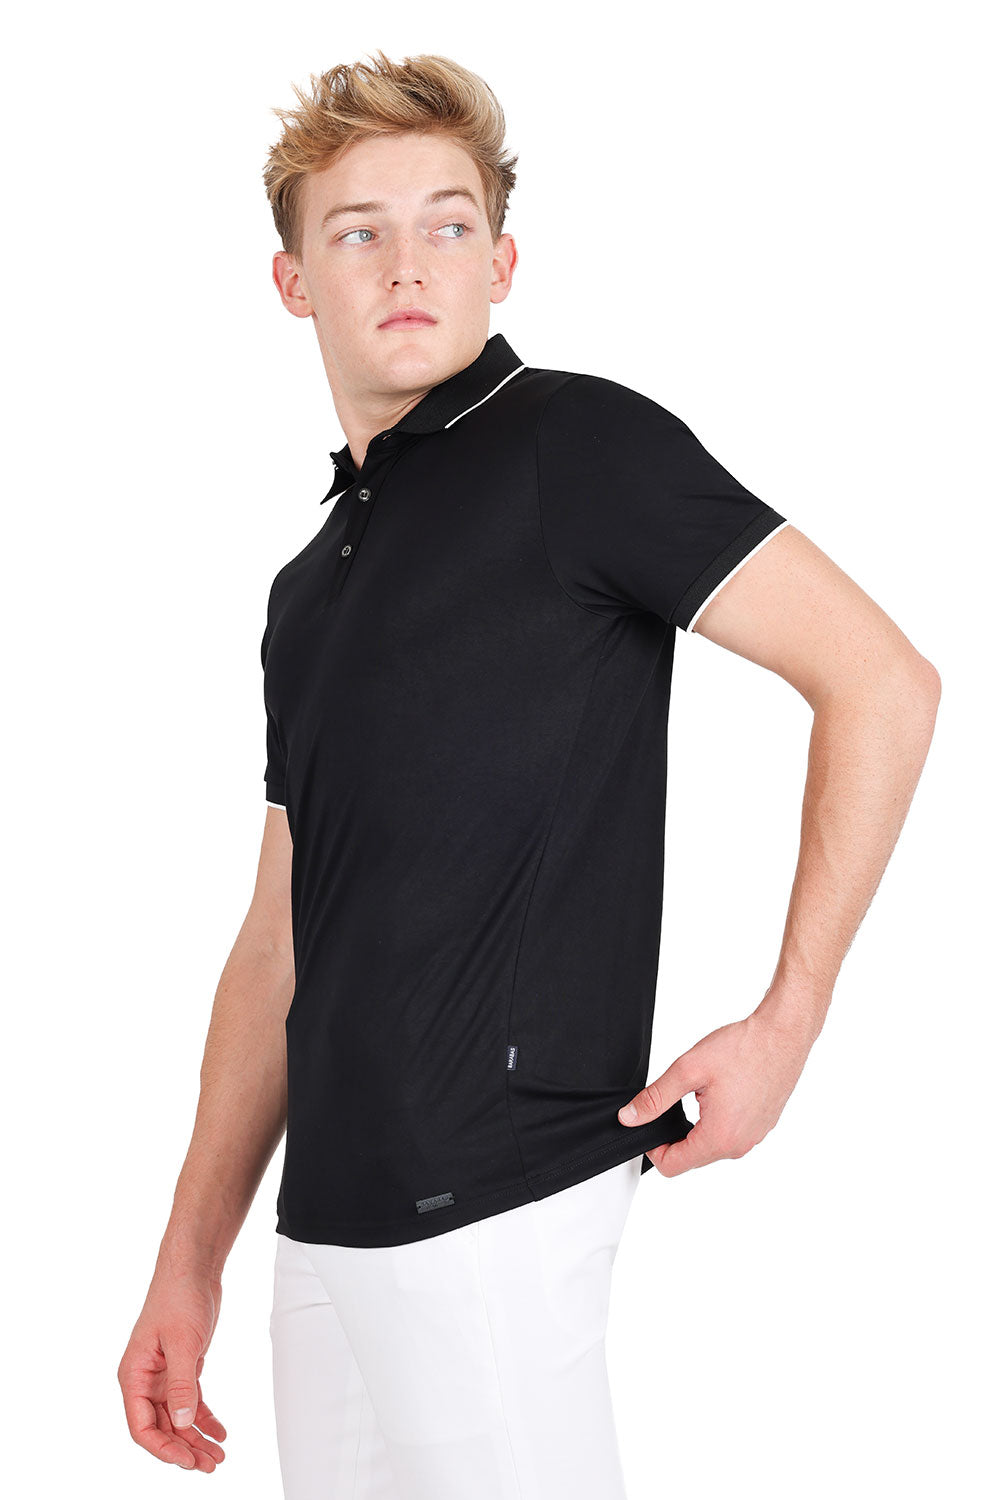 Barabas Men's Solid Color Luxury Short Sleeves Polo Shirts 2PP825 Black